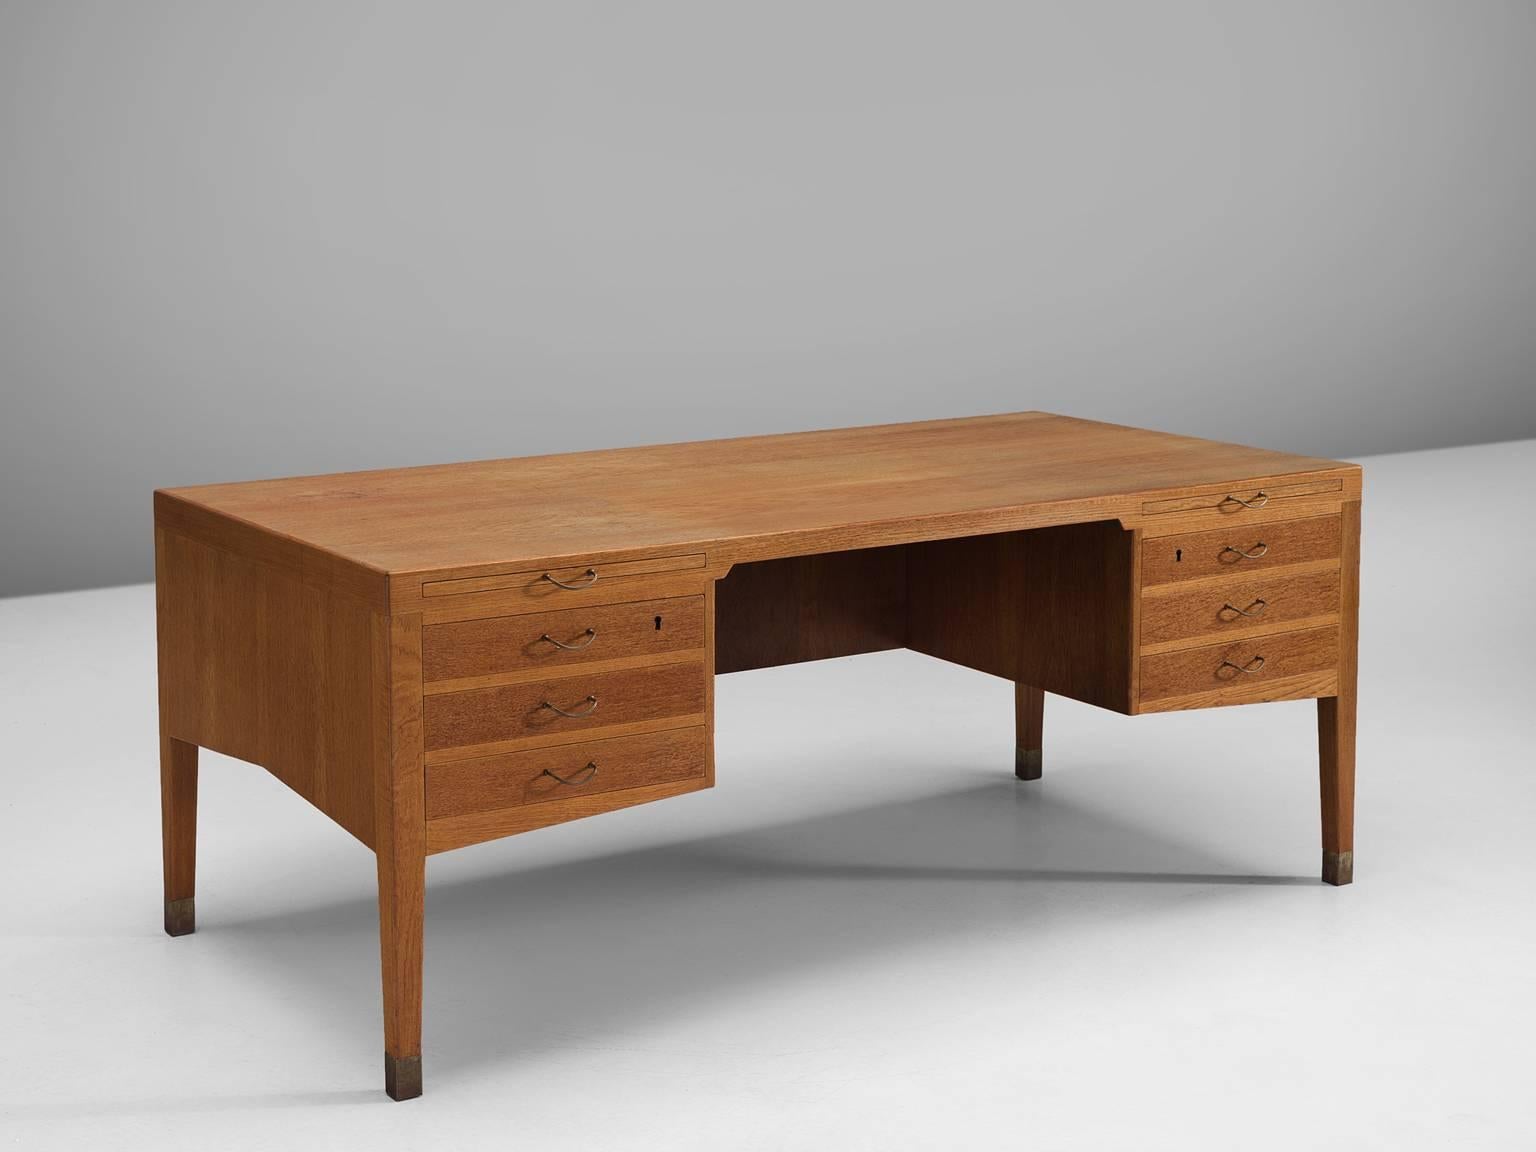 Alfred Hendrickx desk, teak, brass, Belgium, circa 1950

This freestanding desk in teak and brass is designed by the Belgian designer Alfred Hendrickx. The most interesting thing about this desk is perhaps that it is free-standing. It has an open